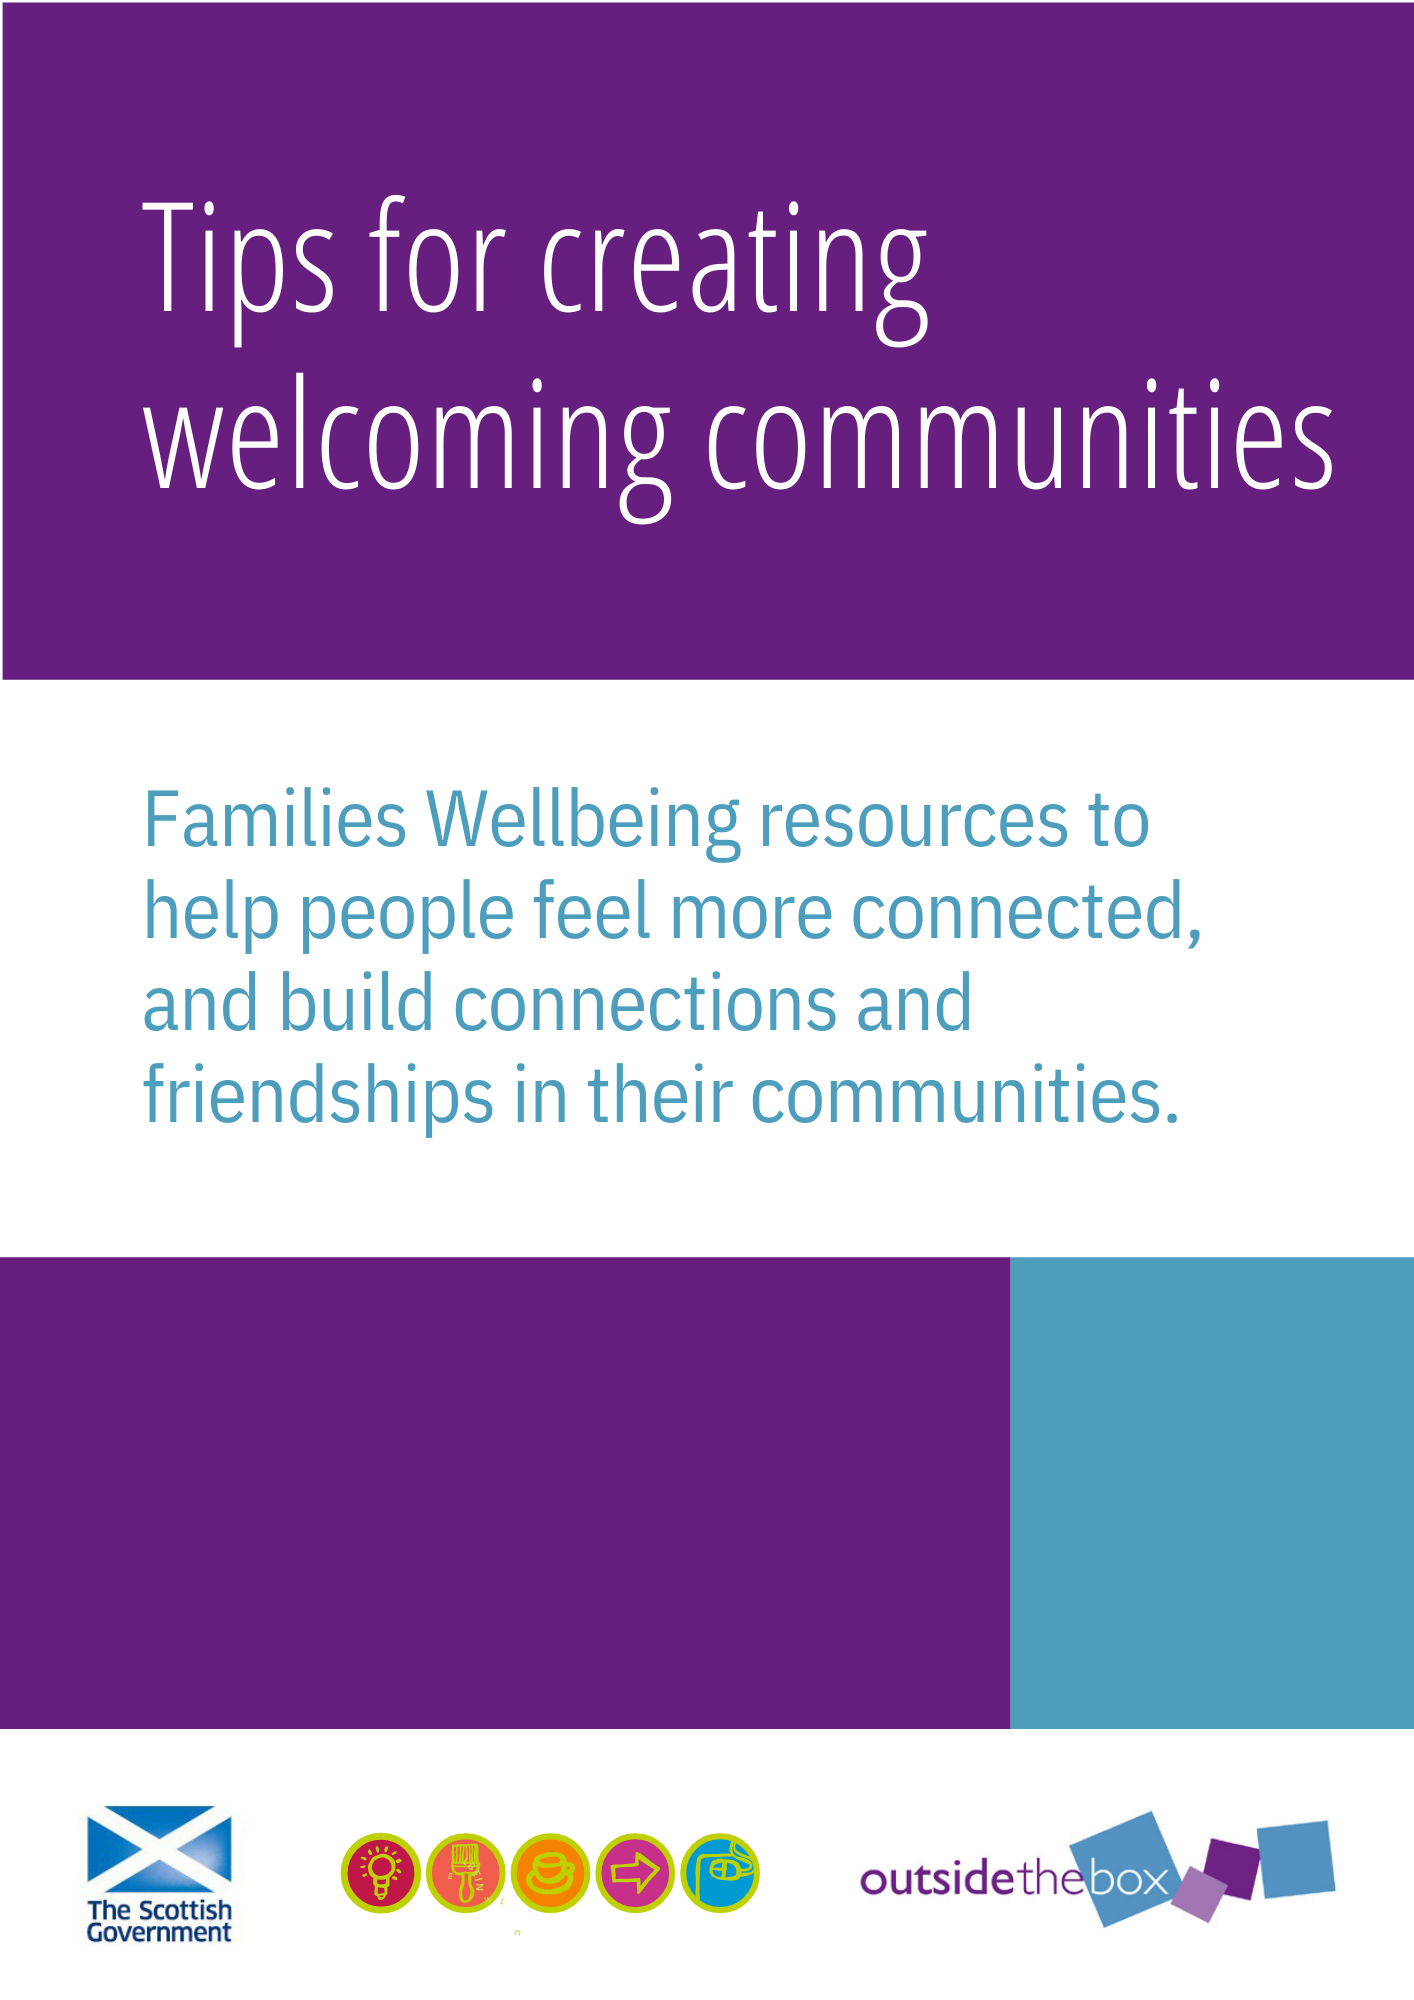 Tips for creating welcoming communities. Families Wellbeing resources to help people feel more connected, and build connections and friendships in their communities.